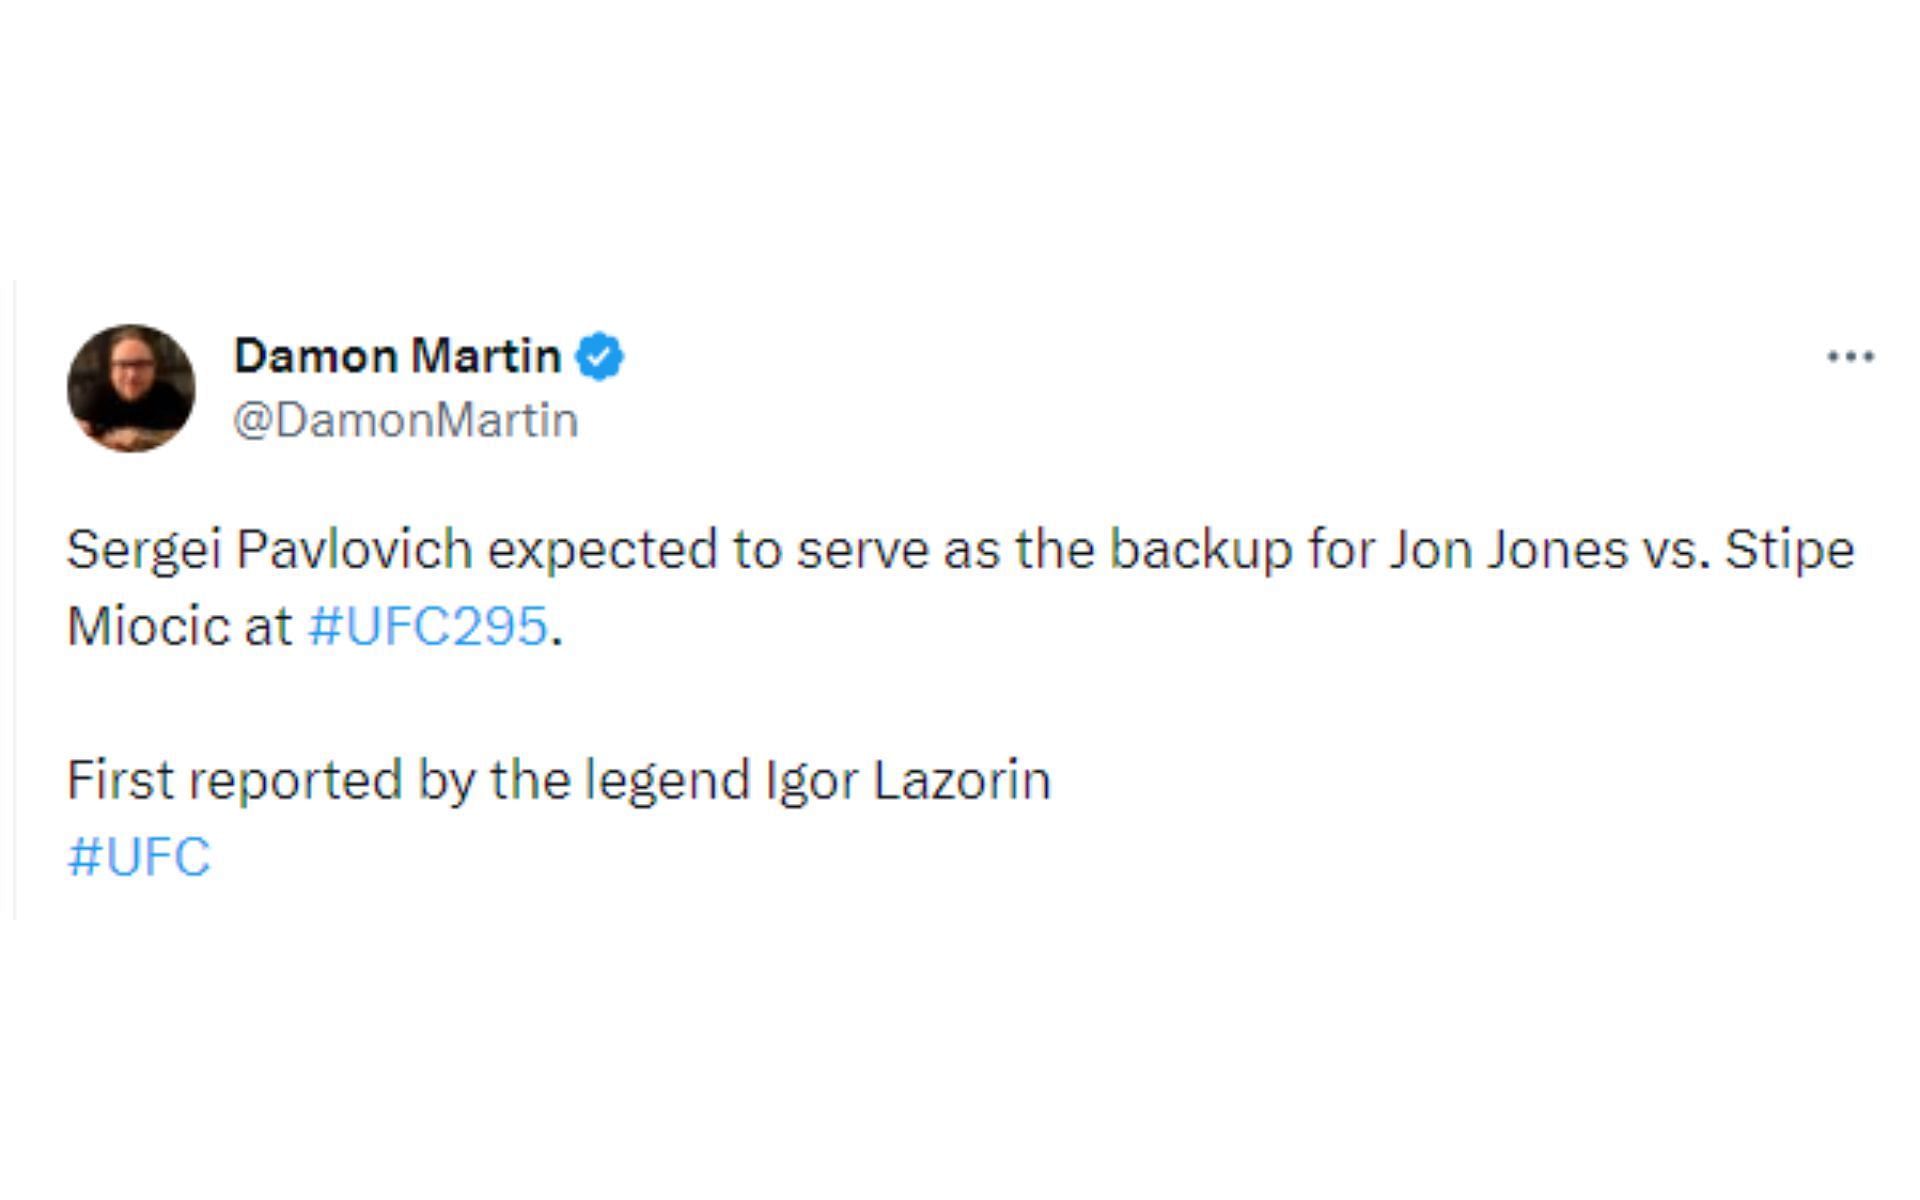 Damon Martin tweeted about a backup fighter for Jones vs. Miocic